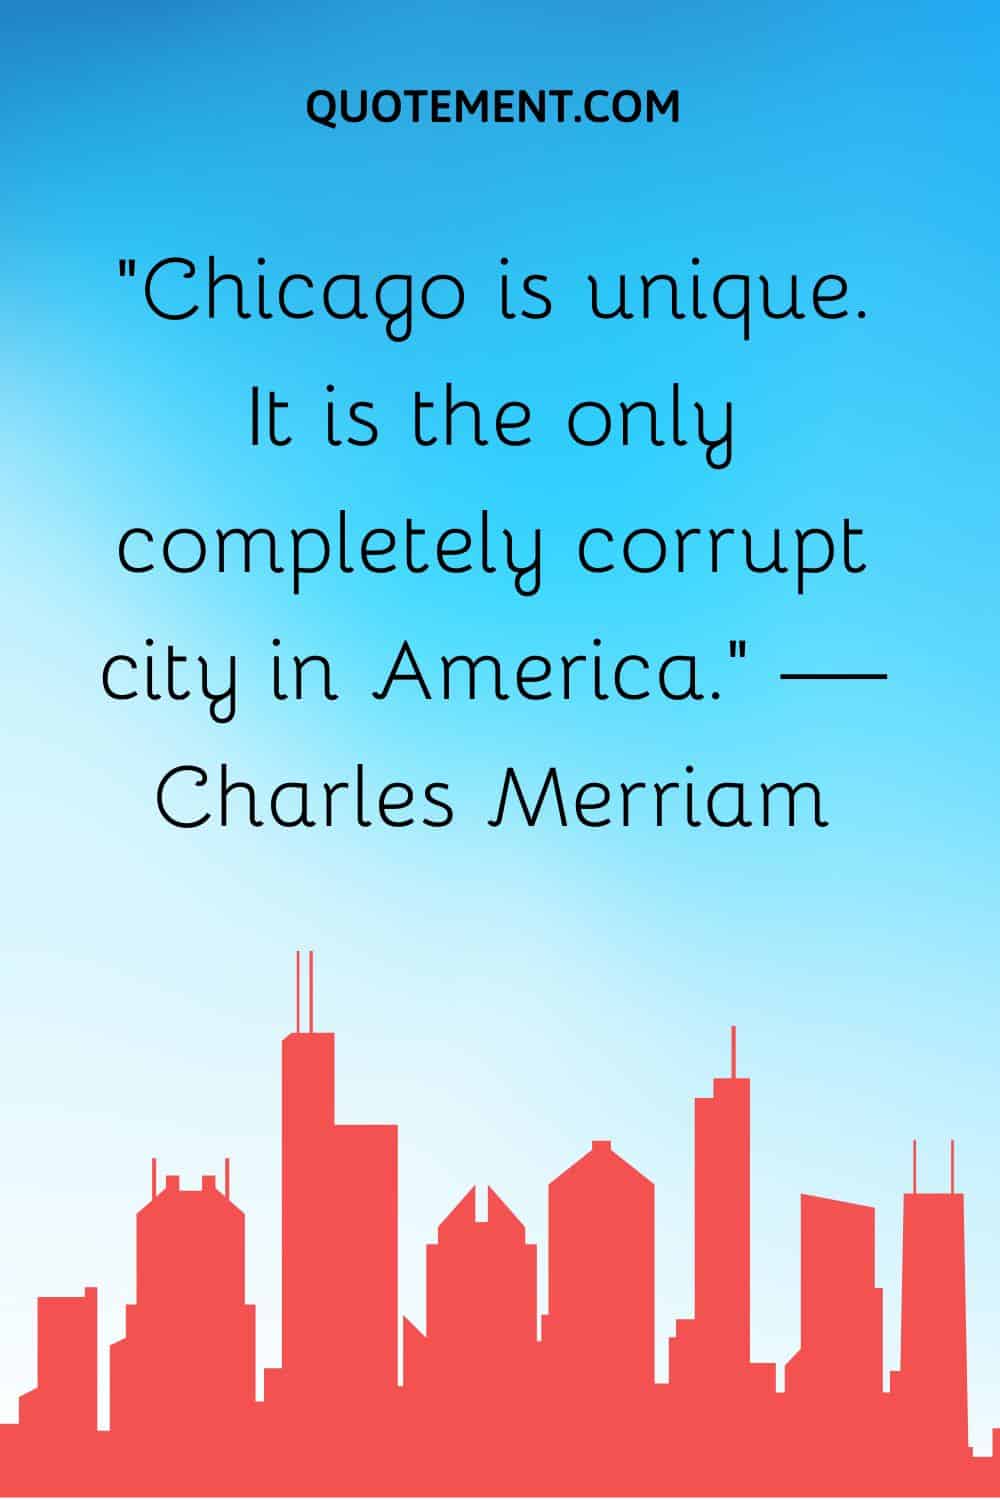 “Chicago is unique. It is the only completely corrupt city in America.” — Charles Merriam